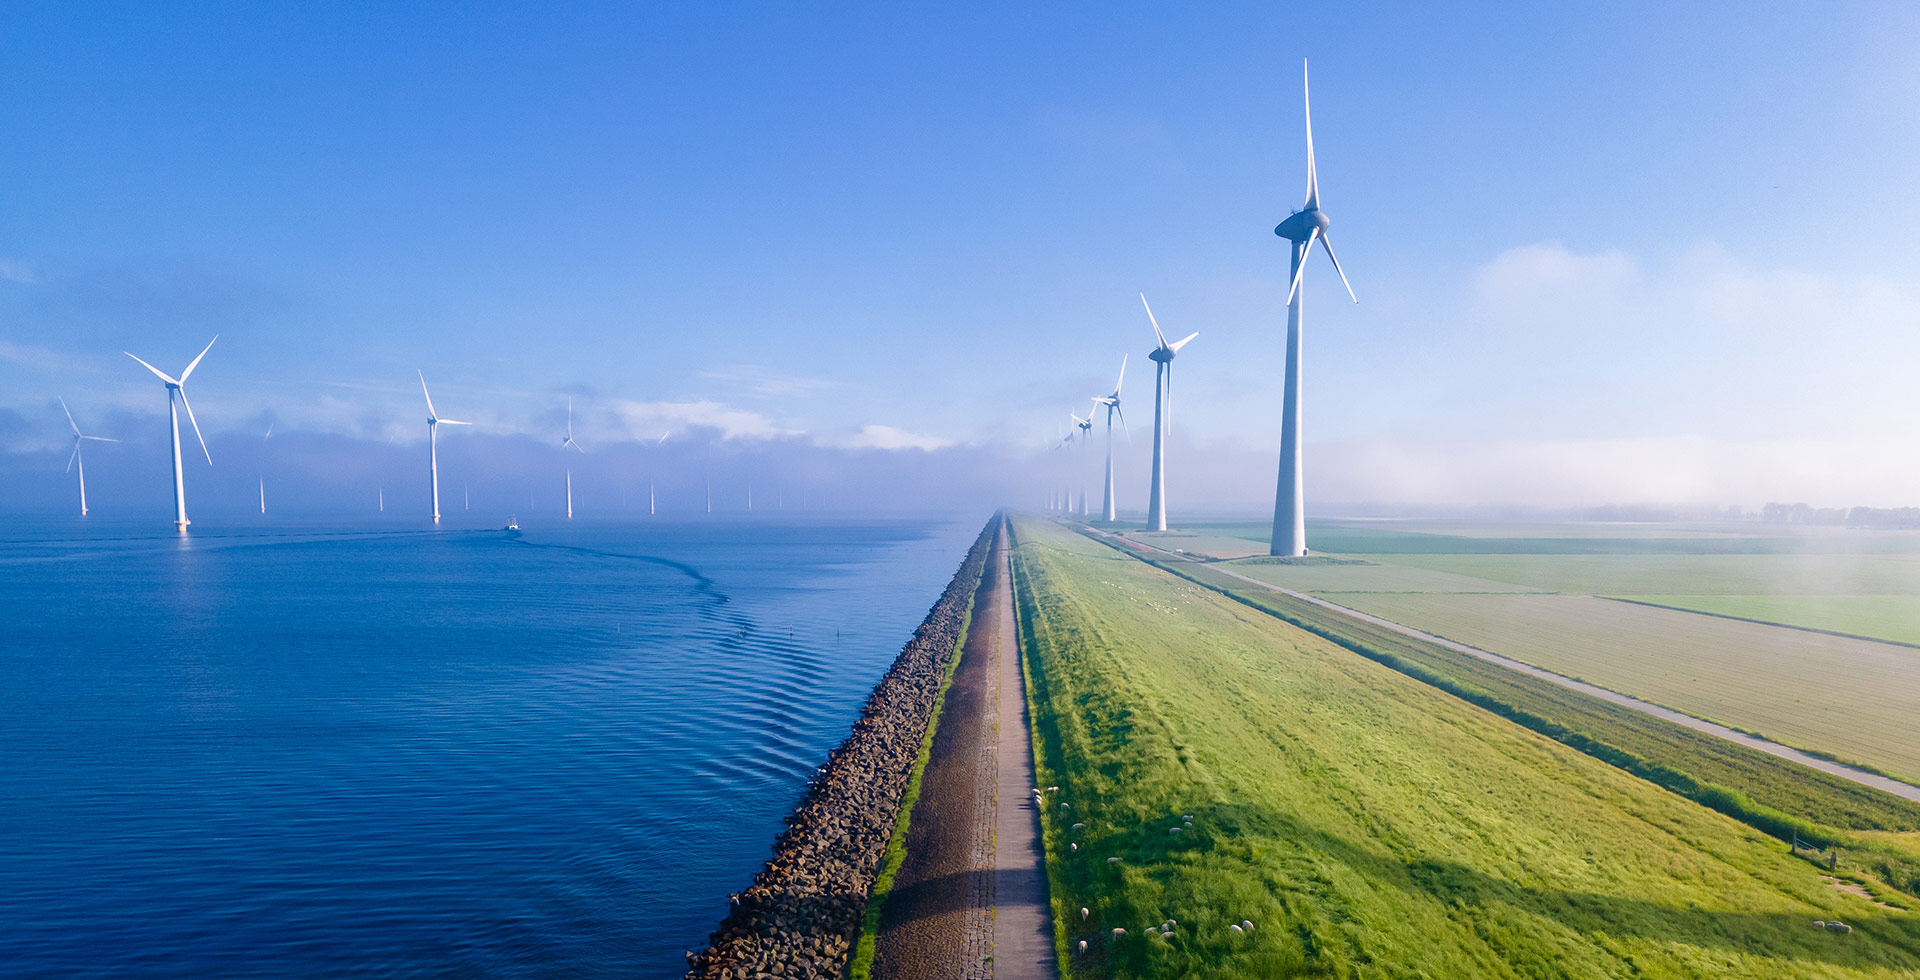 Sea meets land with several wind turbines across the water and the land.